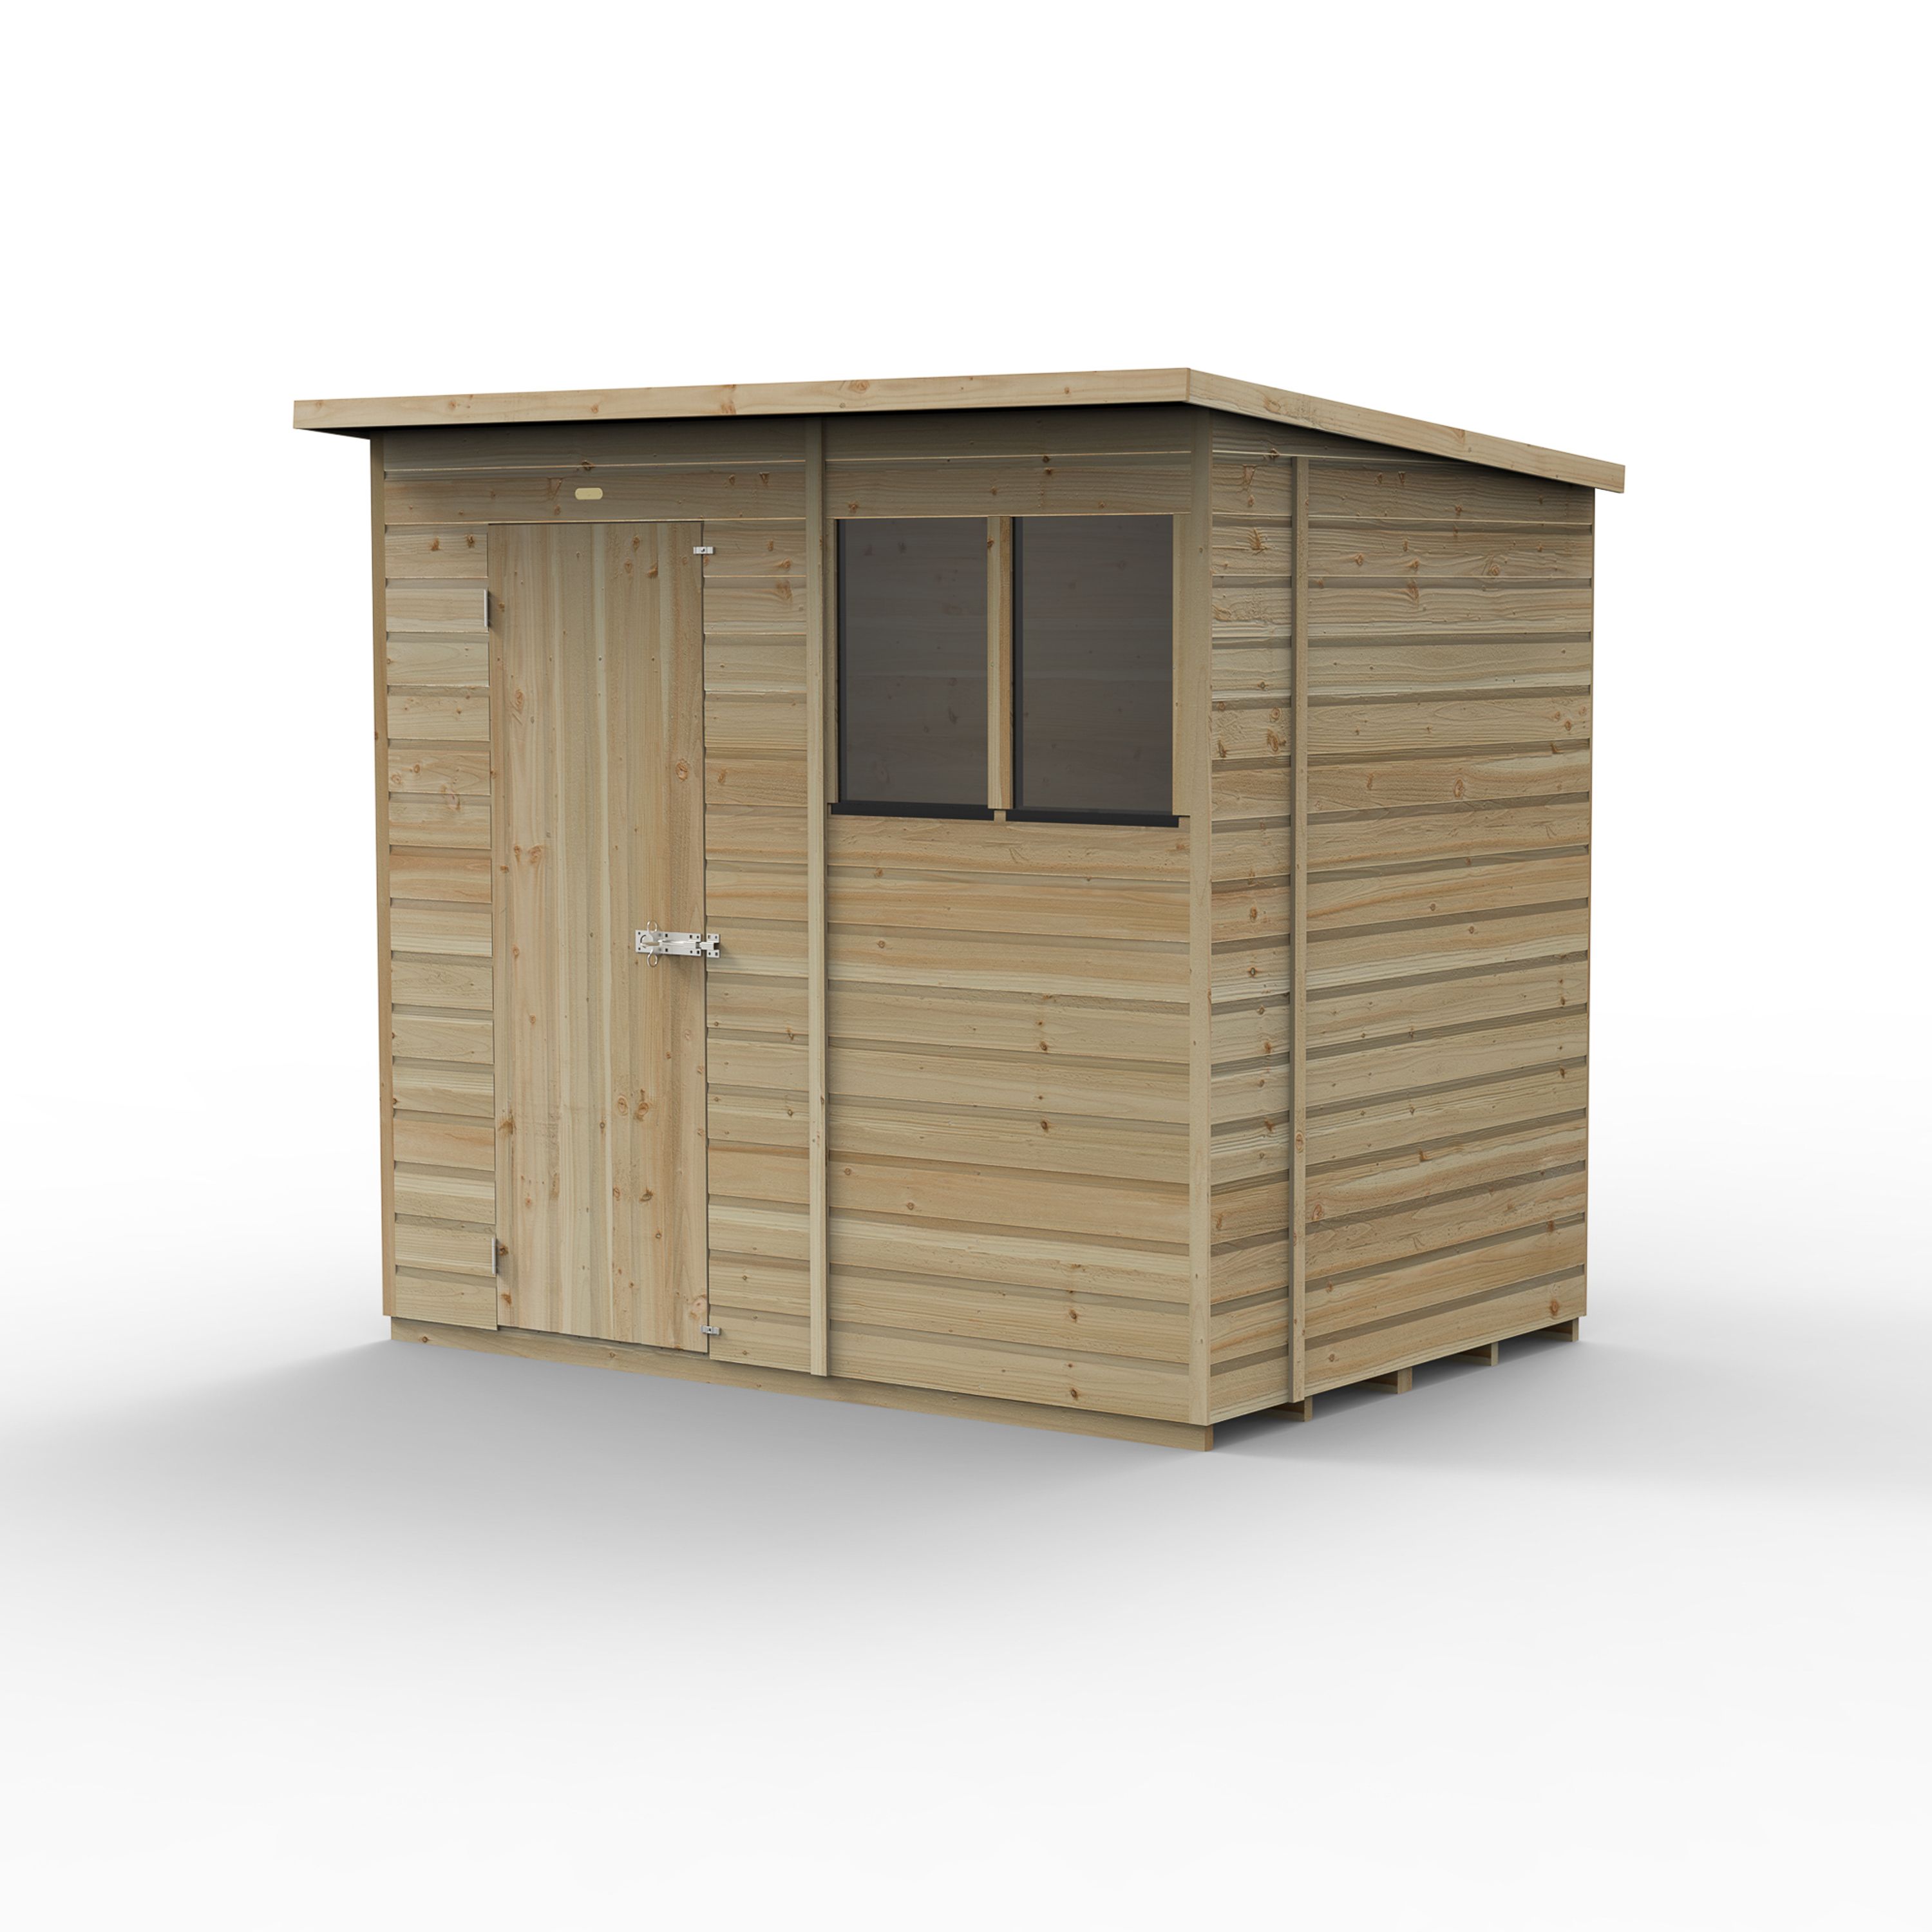 Forest Garden Beckwood 7x5 ft Pent Natural timber Wooden Shed with floor & 2 windows